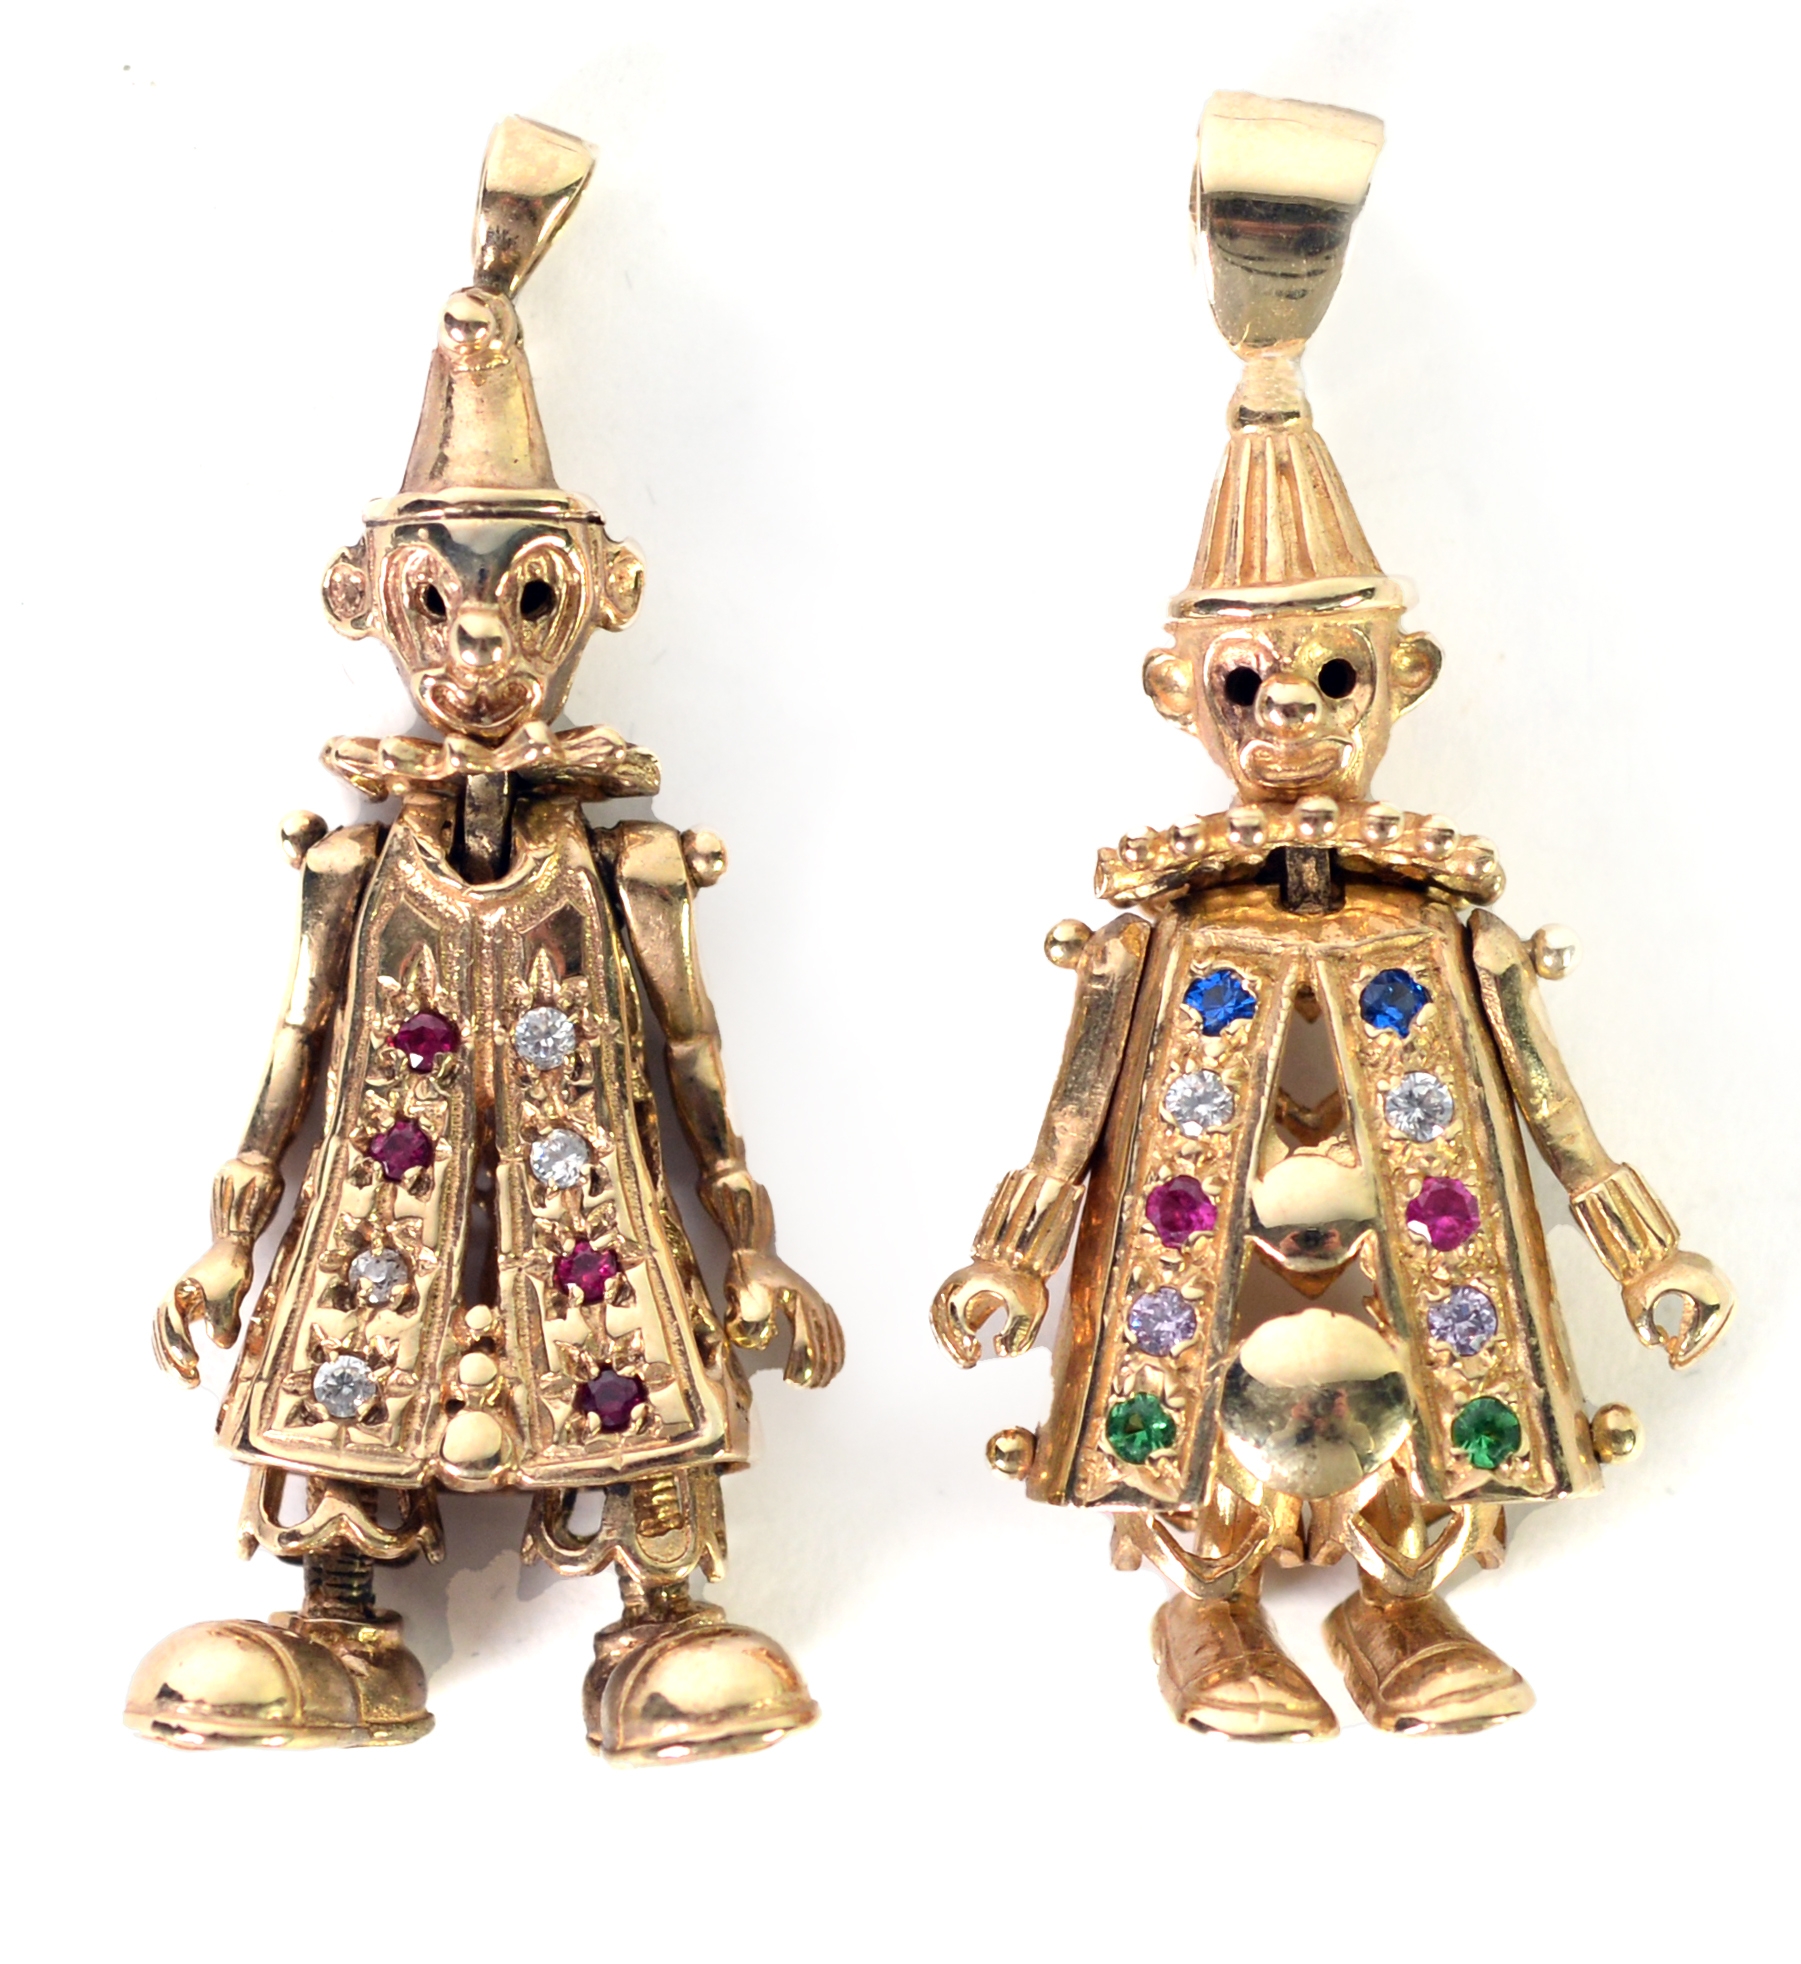 TWO 9ct GOLD ARTICULATED FIGURES of clowns, as pendants, paste set, 1 ½” (3.5cm) high, excluding the